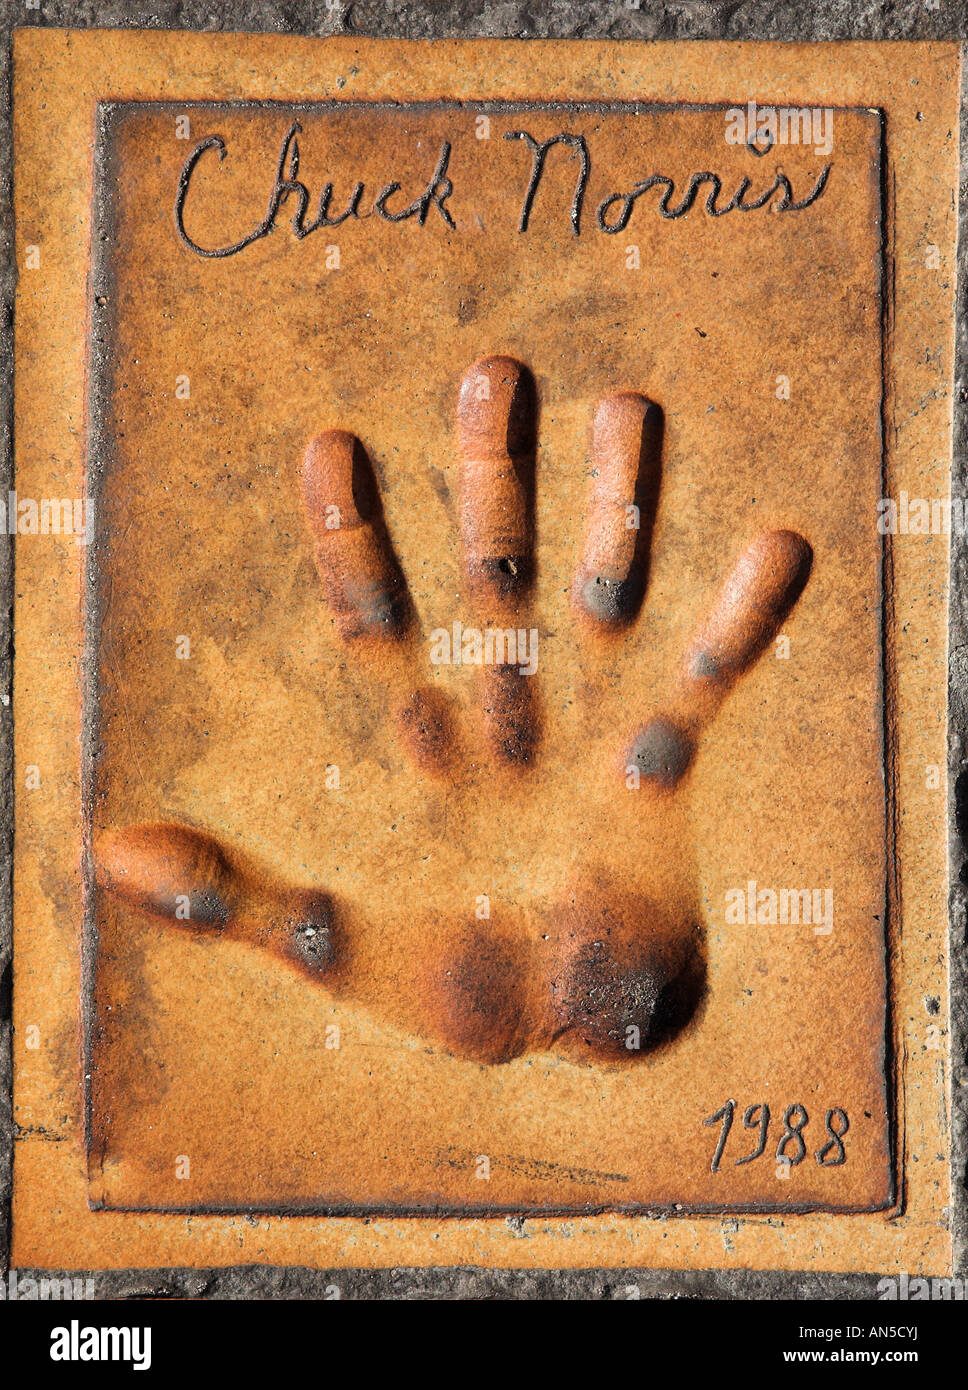 Handprint of Chuck Norris in front of the Cannes Main Film Festival Theatre France Stock Photo